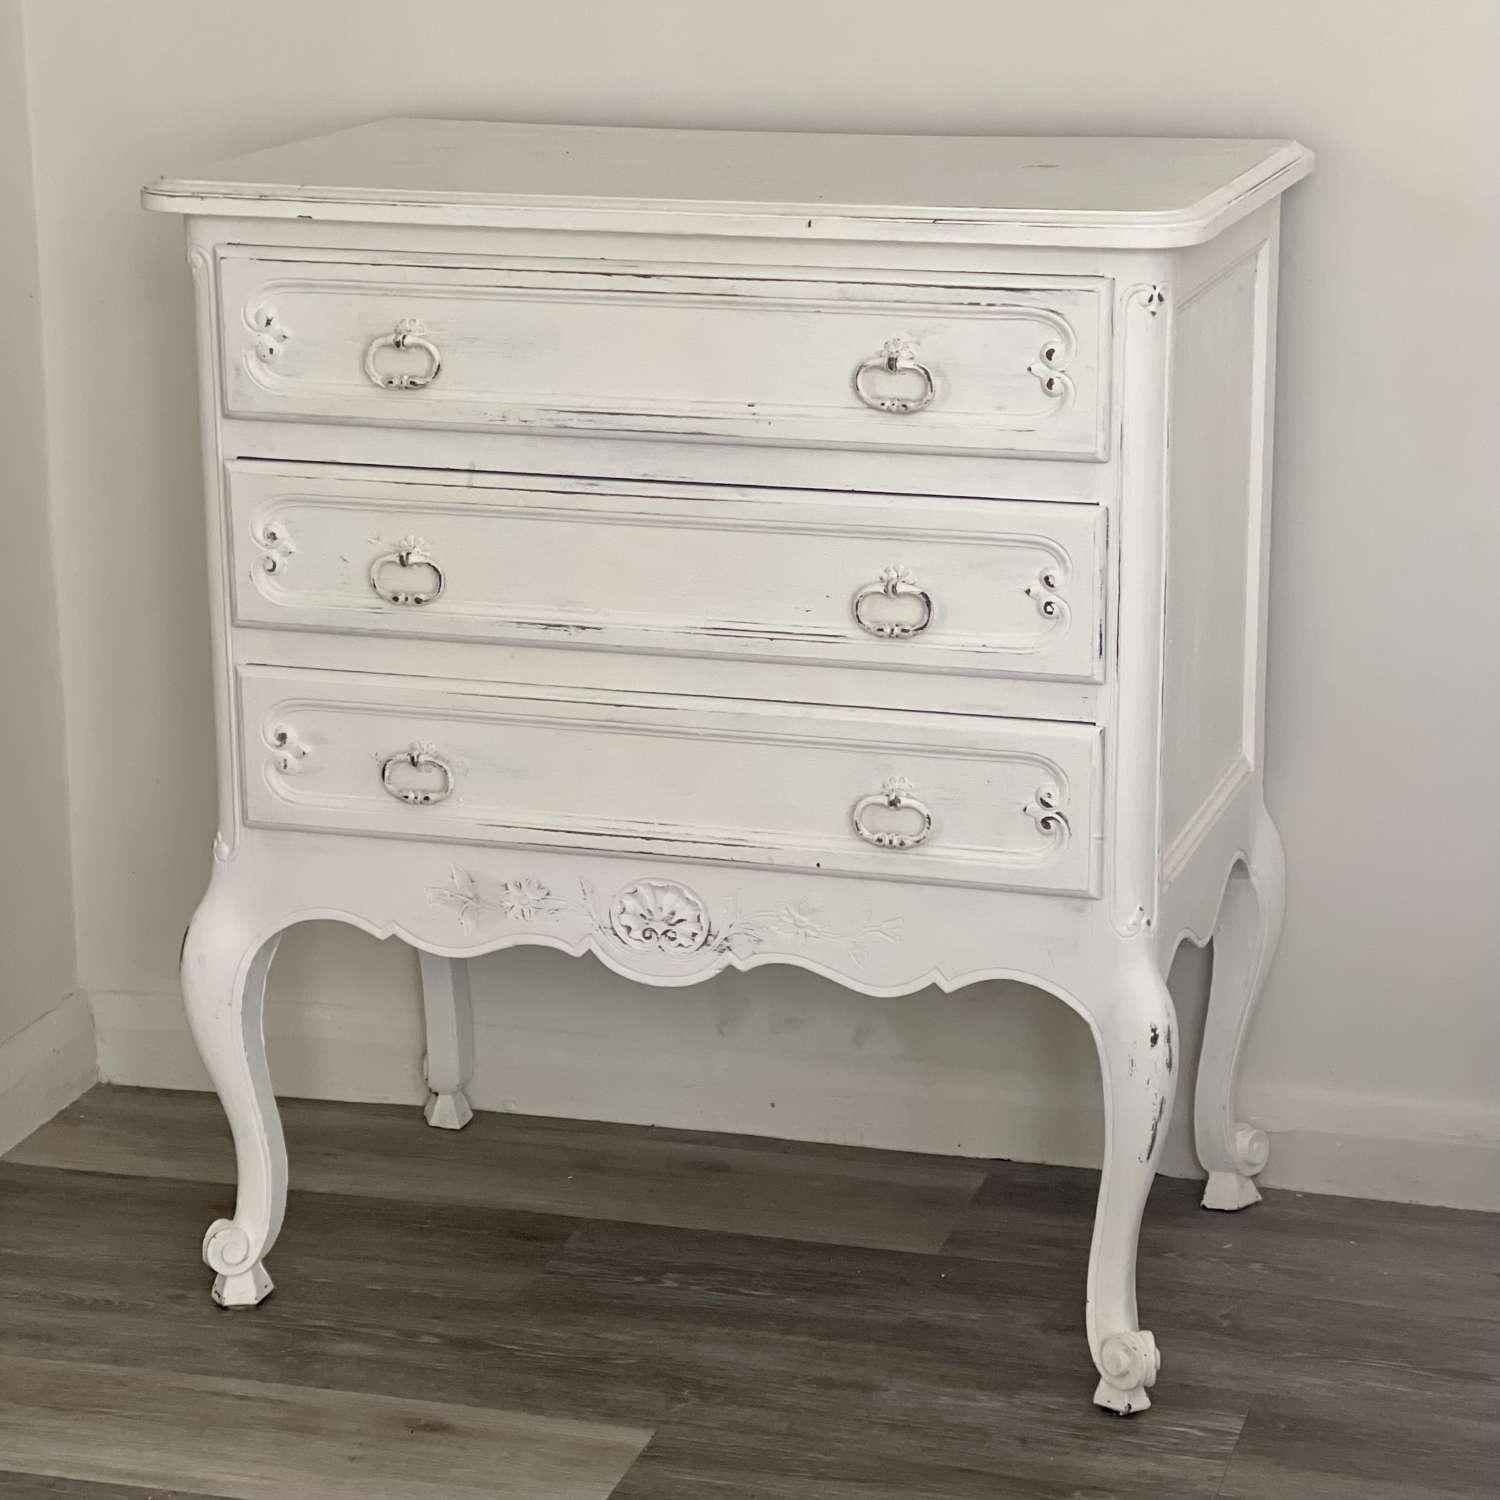 Antique French painted chest of drawers